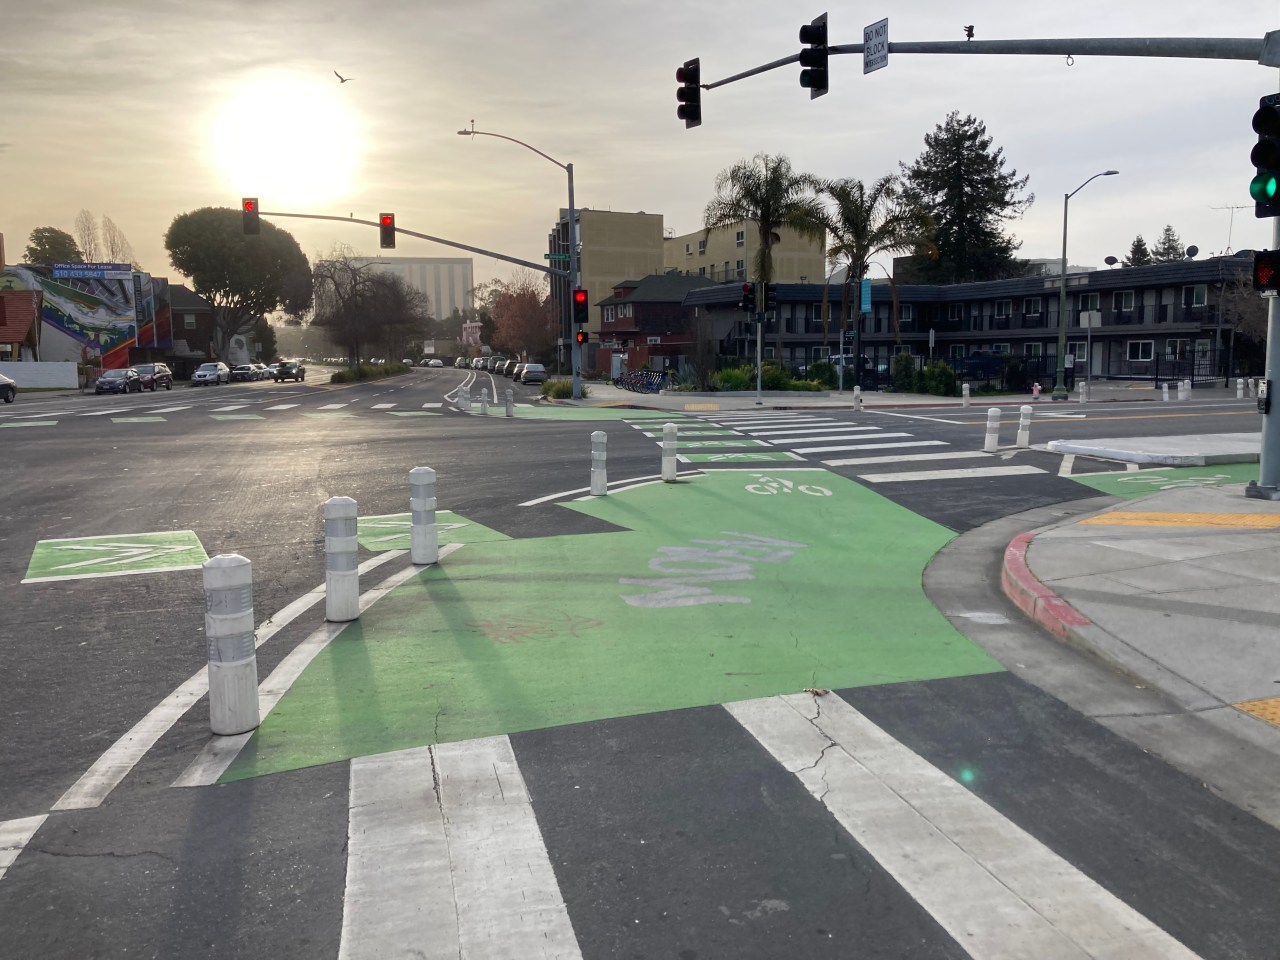 A bike lane with a protected intersection treatment in Oakland's Mosswood neighborhood. Photo: John Greenfield